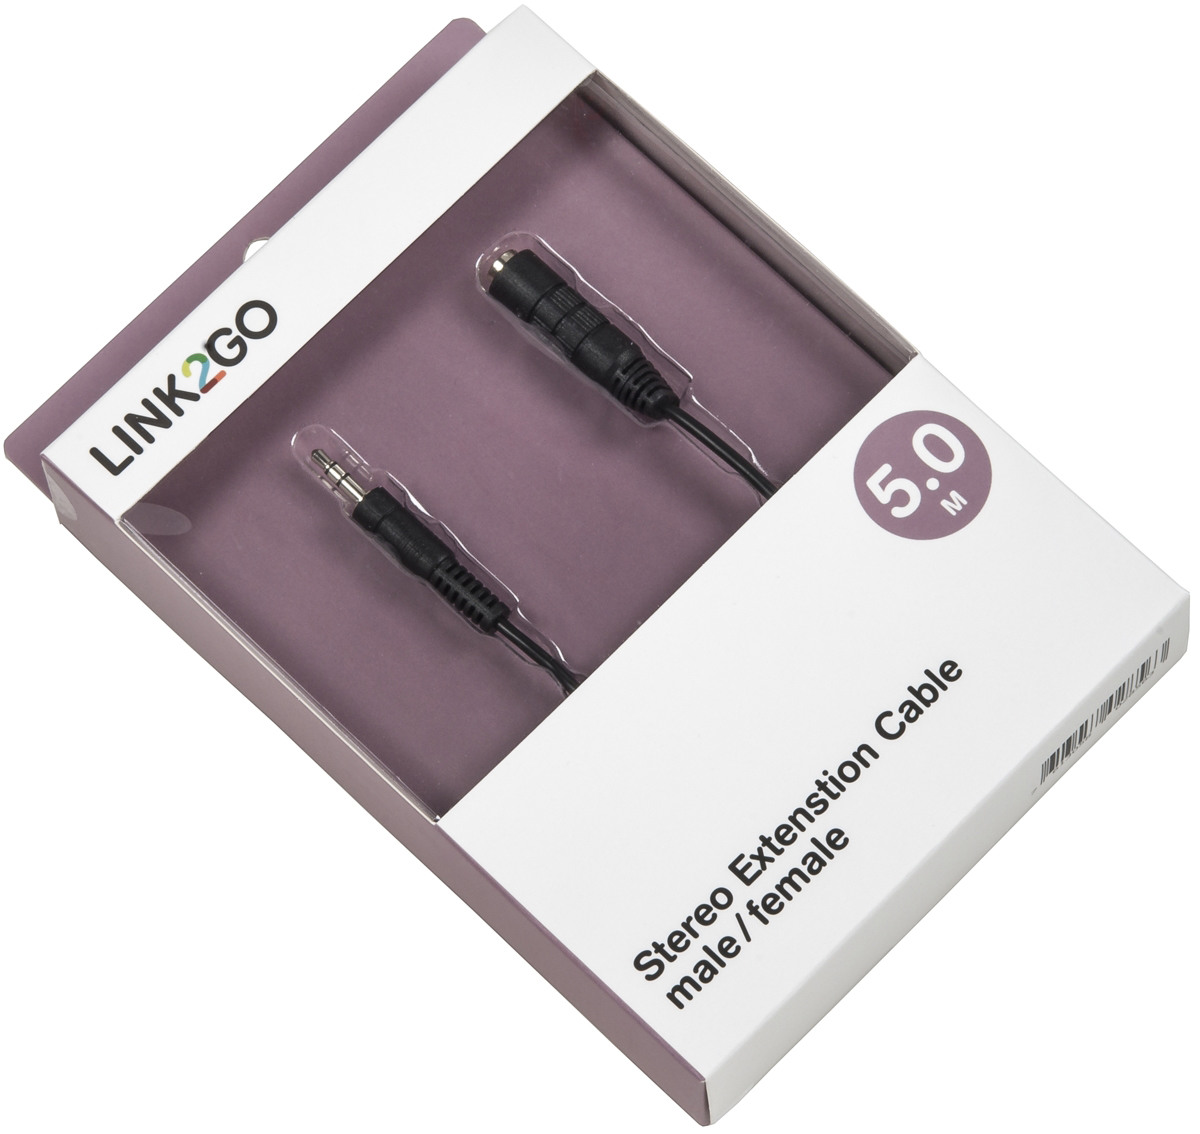 LINK2GO Stereo Extenstion Cable SC3111PBB male/female, 5.0m